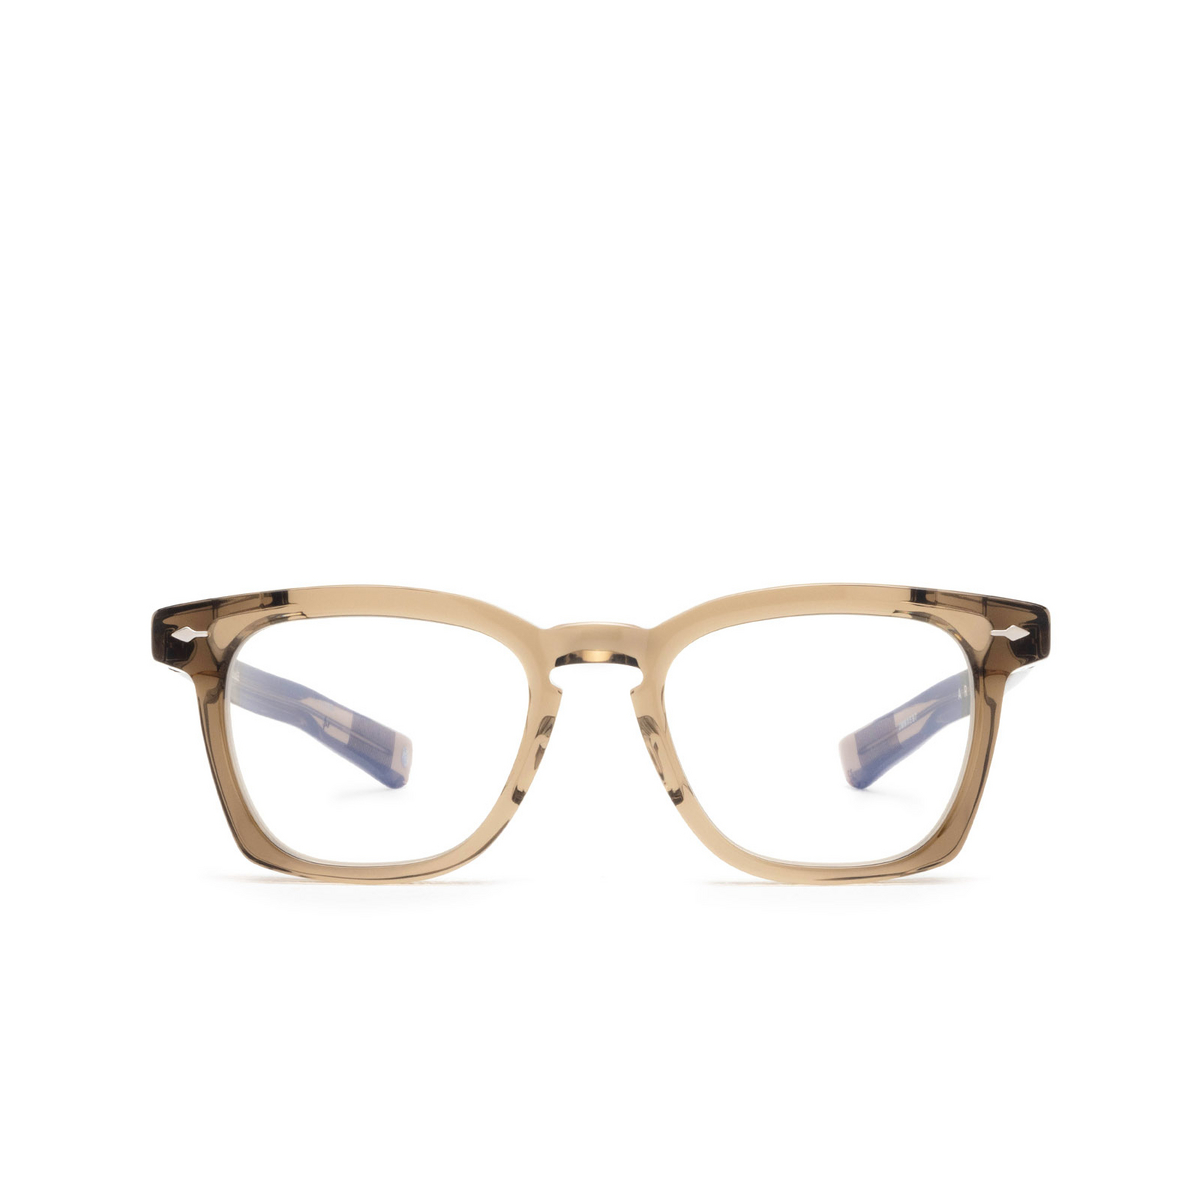 Jacques Marie Mage ARSHILE Eyeglasses TAUPE - front view